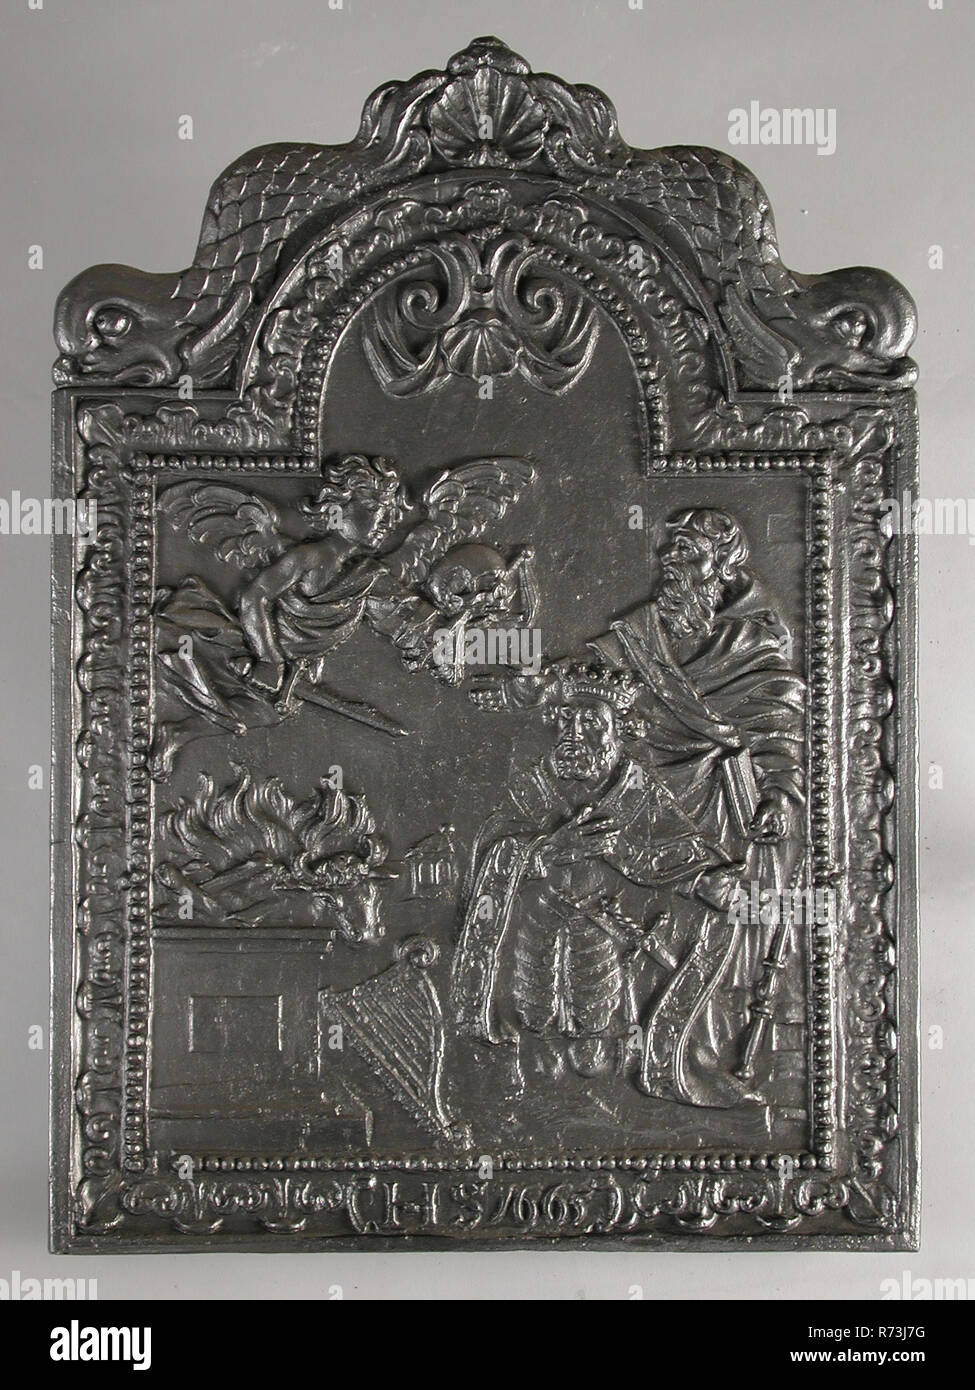 Fireback biblical representation: David and Saul, Year 1665, cast Rectangular with arch at the top. On top of shell flanked by two dolphins Edge between frame and pearl necklace with leaf decoration. In the middle picture of two men: one with book the other with crown and sword The men are visited by an angel with skull and sword Bottom left stone altar with sacrificed bull In the middle below harp Bottom: HS 1665 living environment interior heating Christianity religion bible king David Saul? Jechizkia? 2 Chronicles 29? Stock Photo